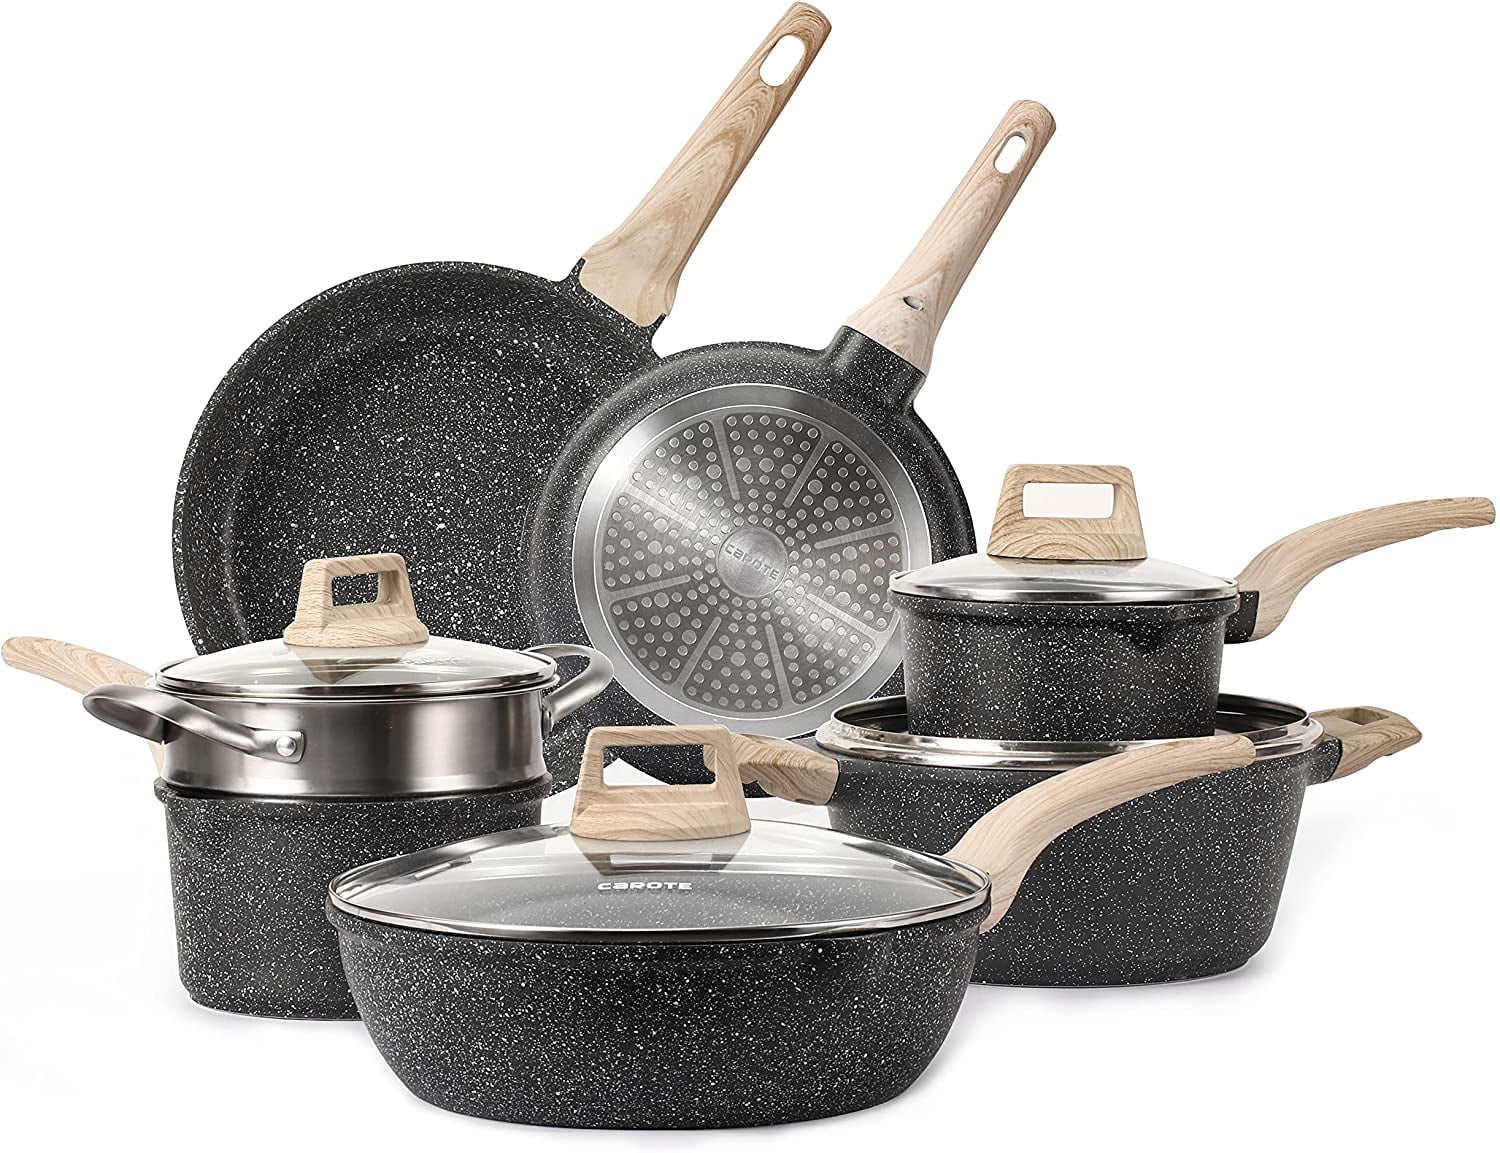 Carote Non-Stick Granite Cookware Sets,11-Piece Frying Pan and Pot Set ...